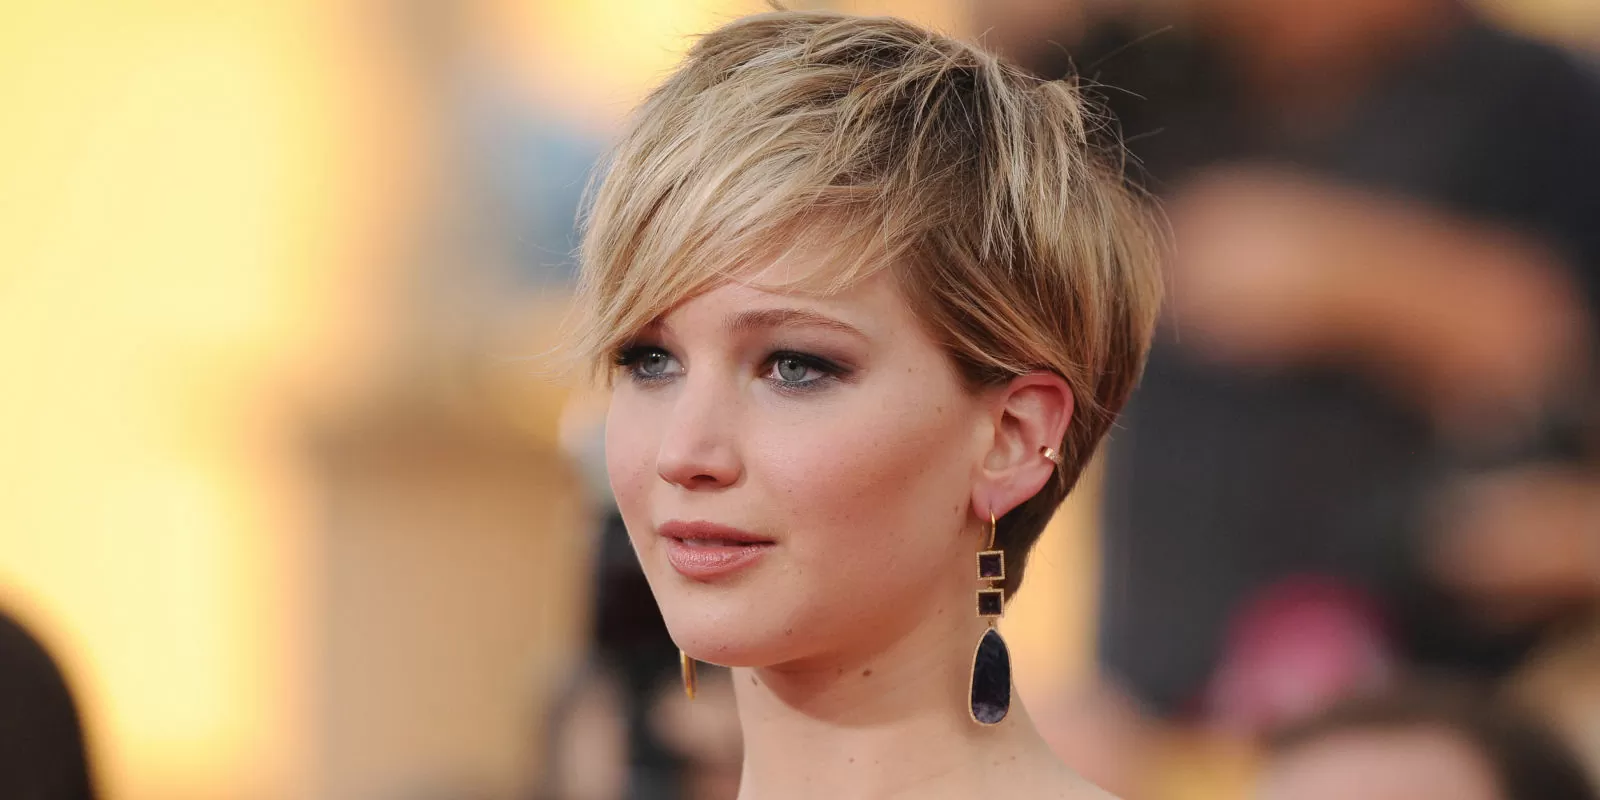 Short Hairstyles and Short Haircuts Guide